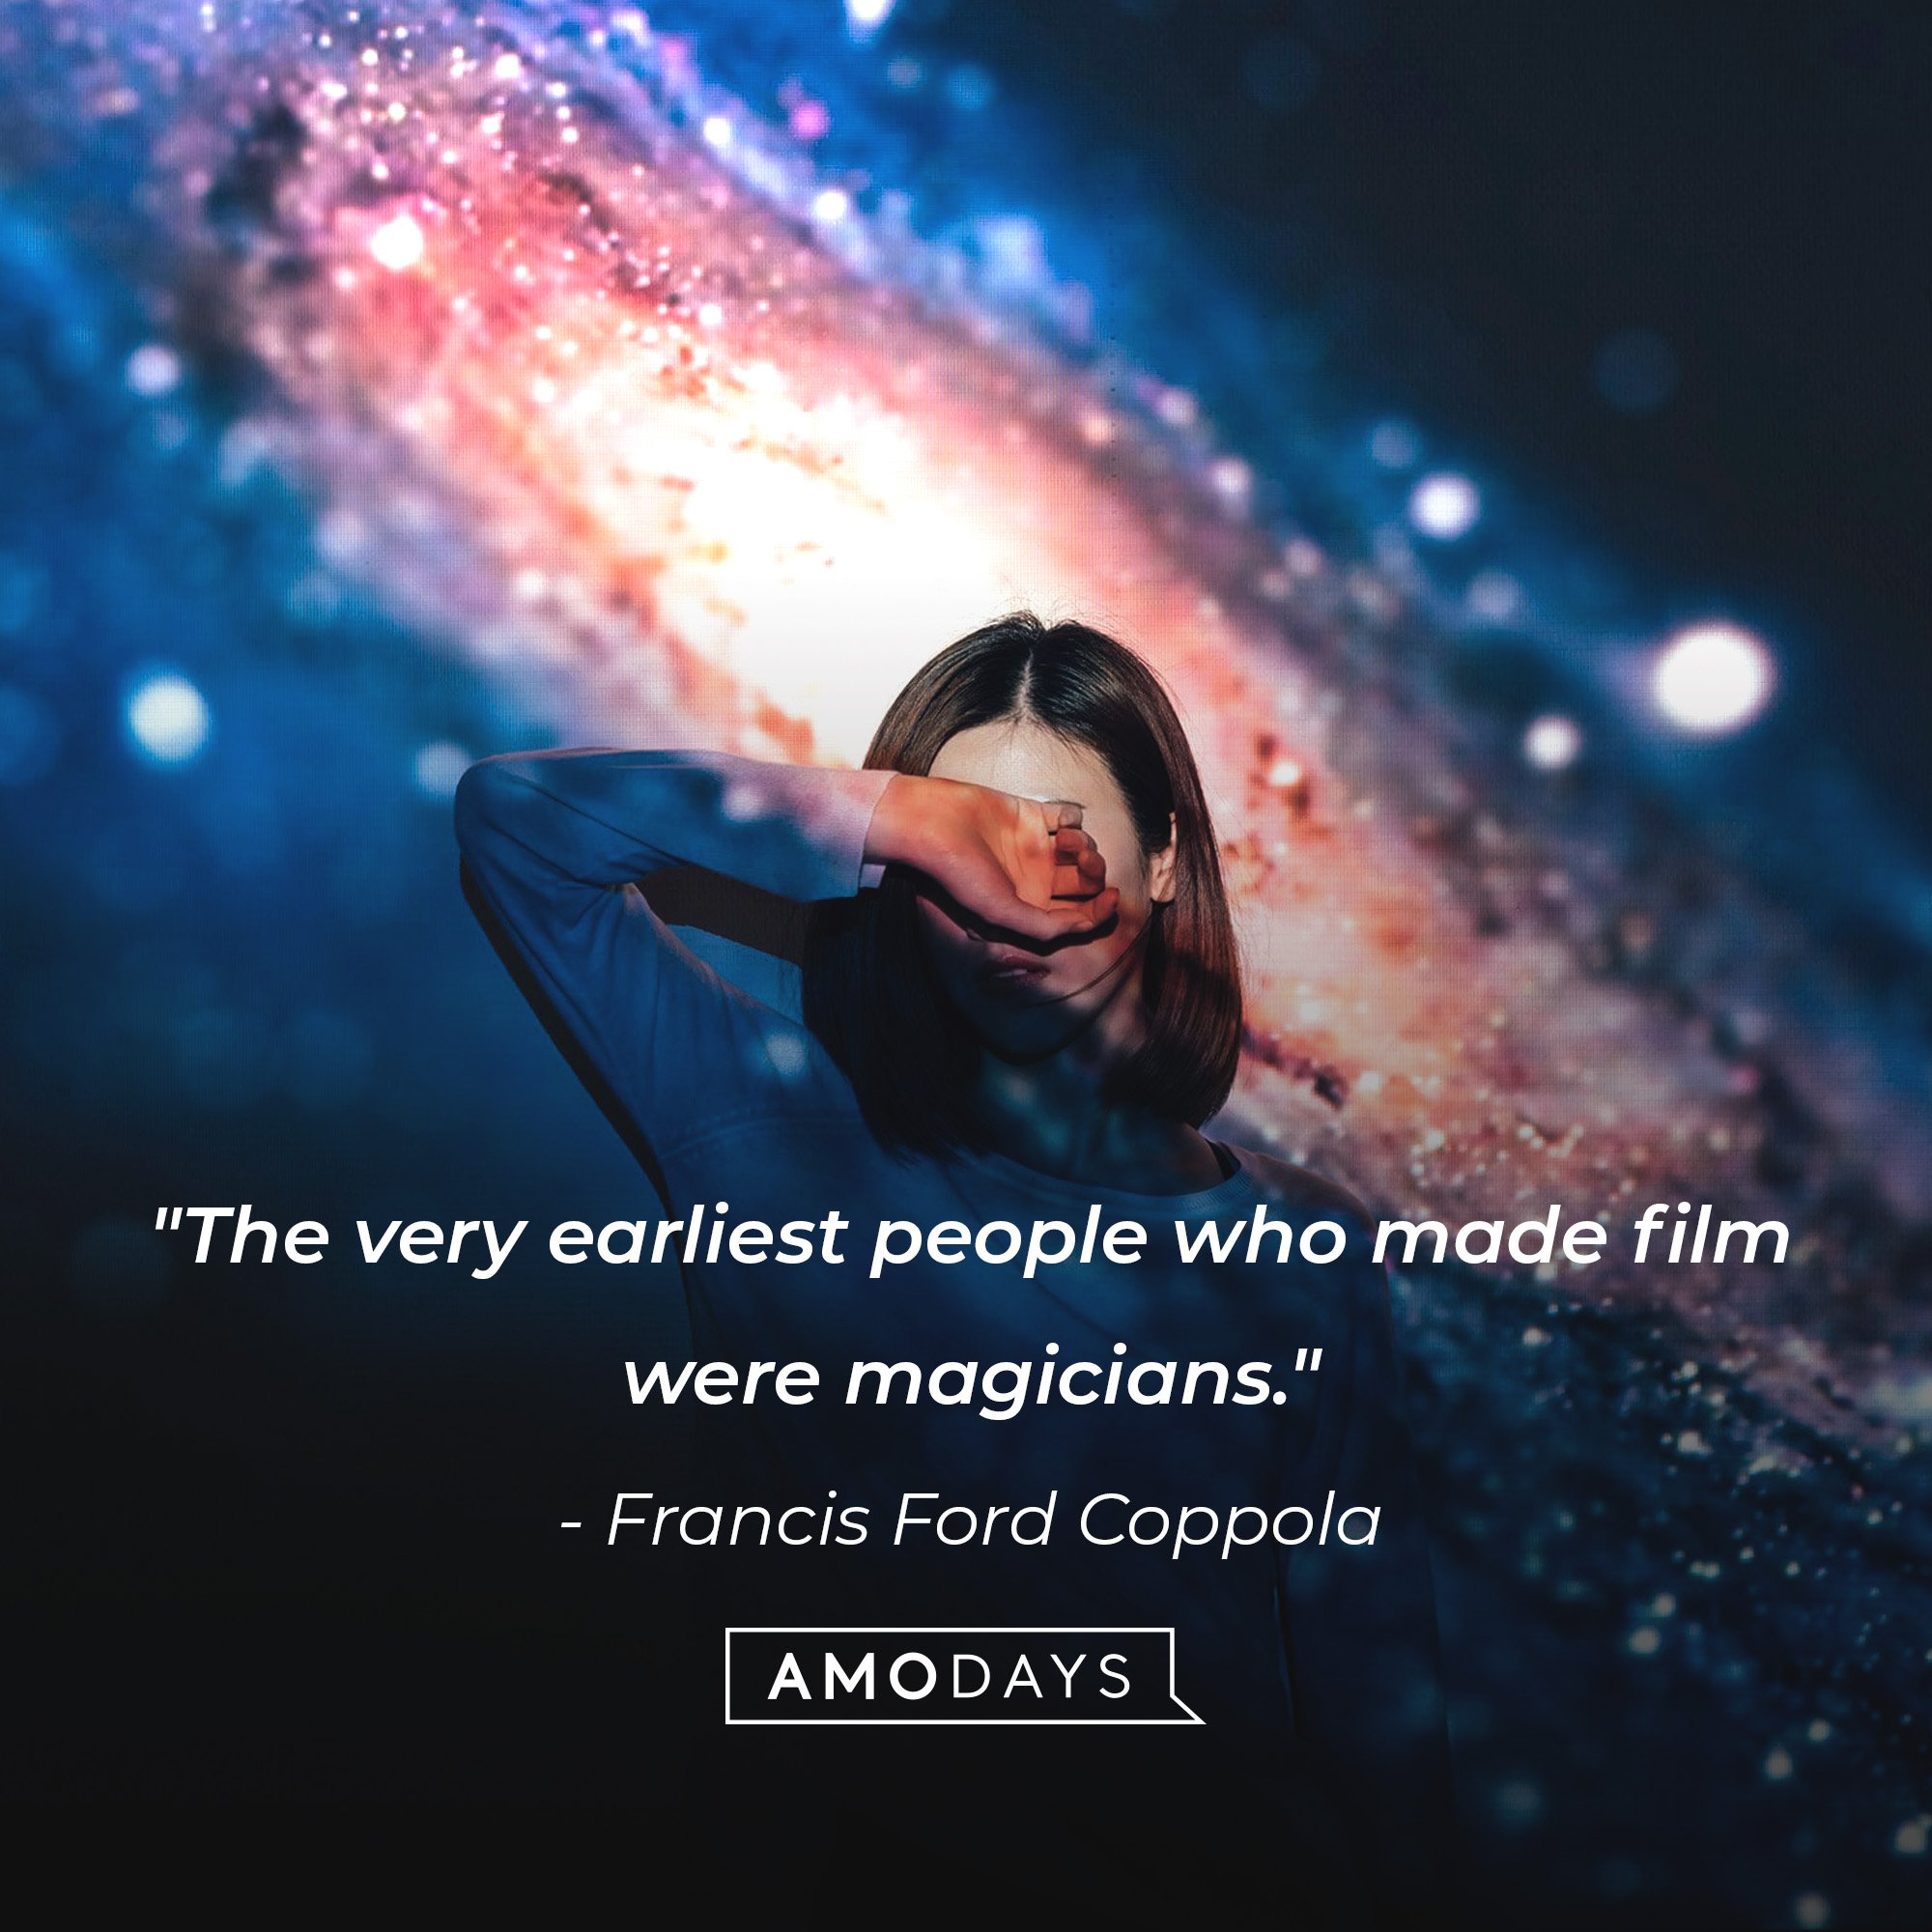  Francis Ford Coppola’s quote: "The very earliest people who made film were magicians." | Image: AmoDays